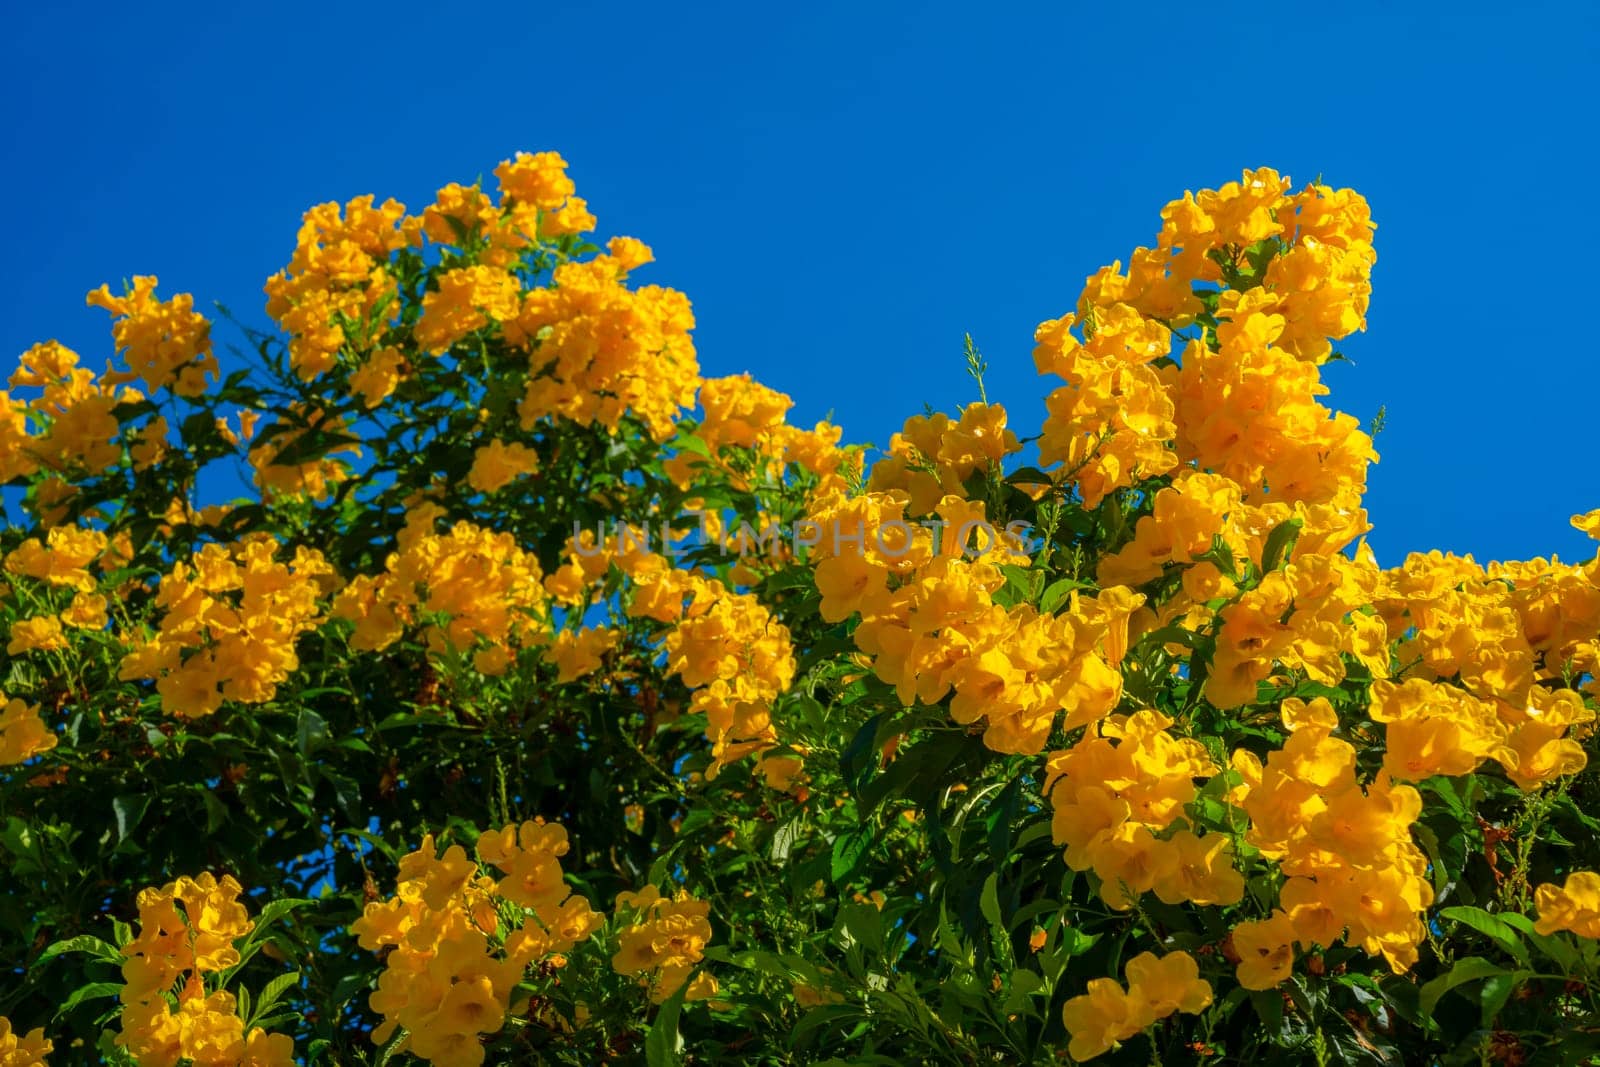 Yellow flowers, Tecoma stans, Yellow bell, Trumpet vine, blooming in a garden on blue sky.